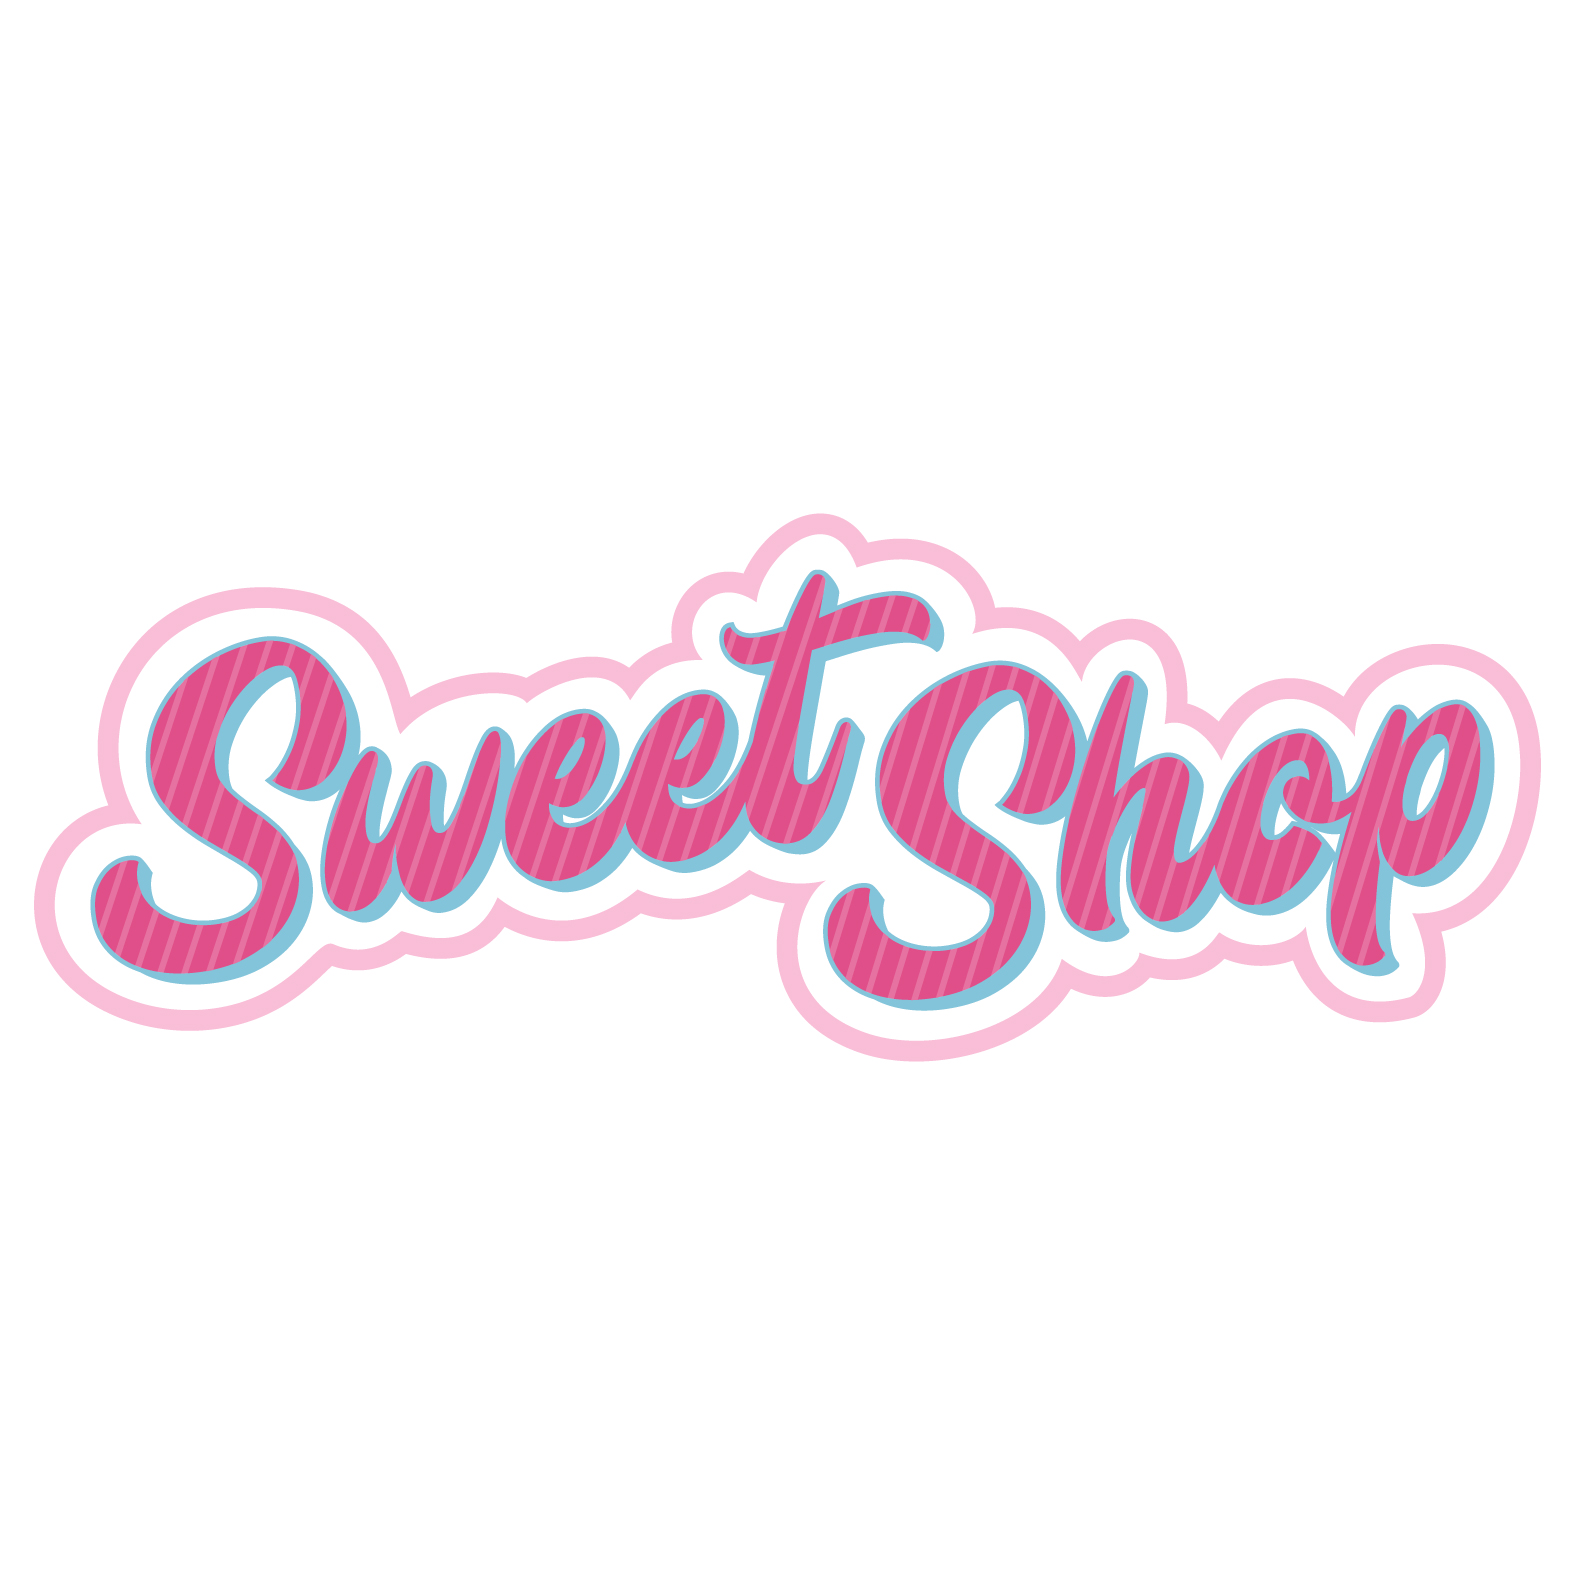  Logo concept for a candy store called  Sweet Shop  